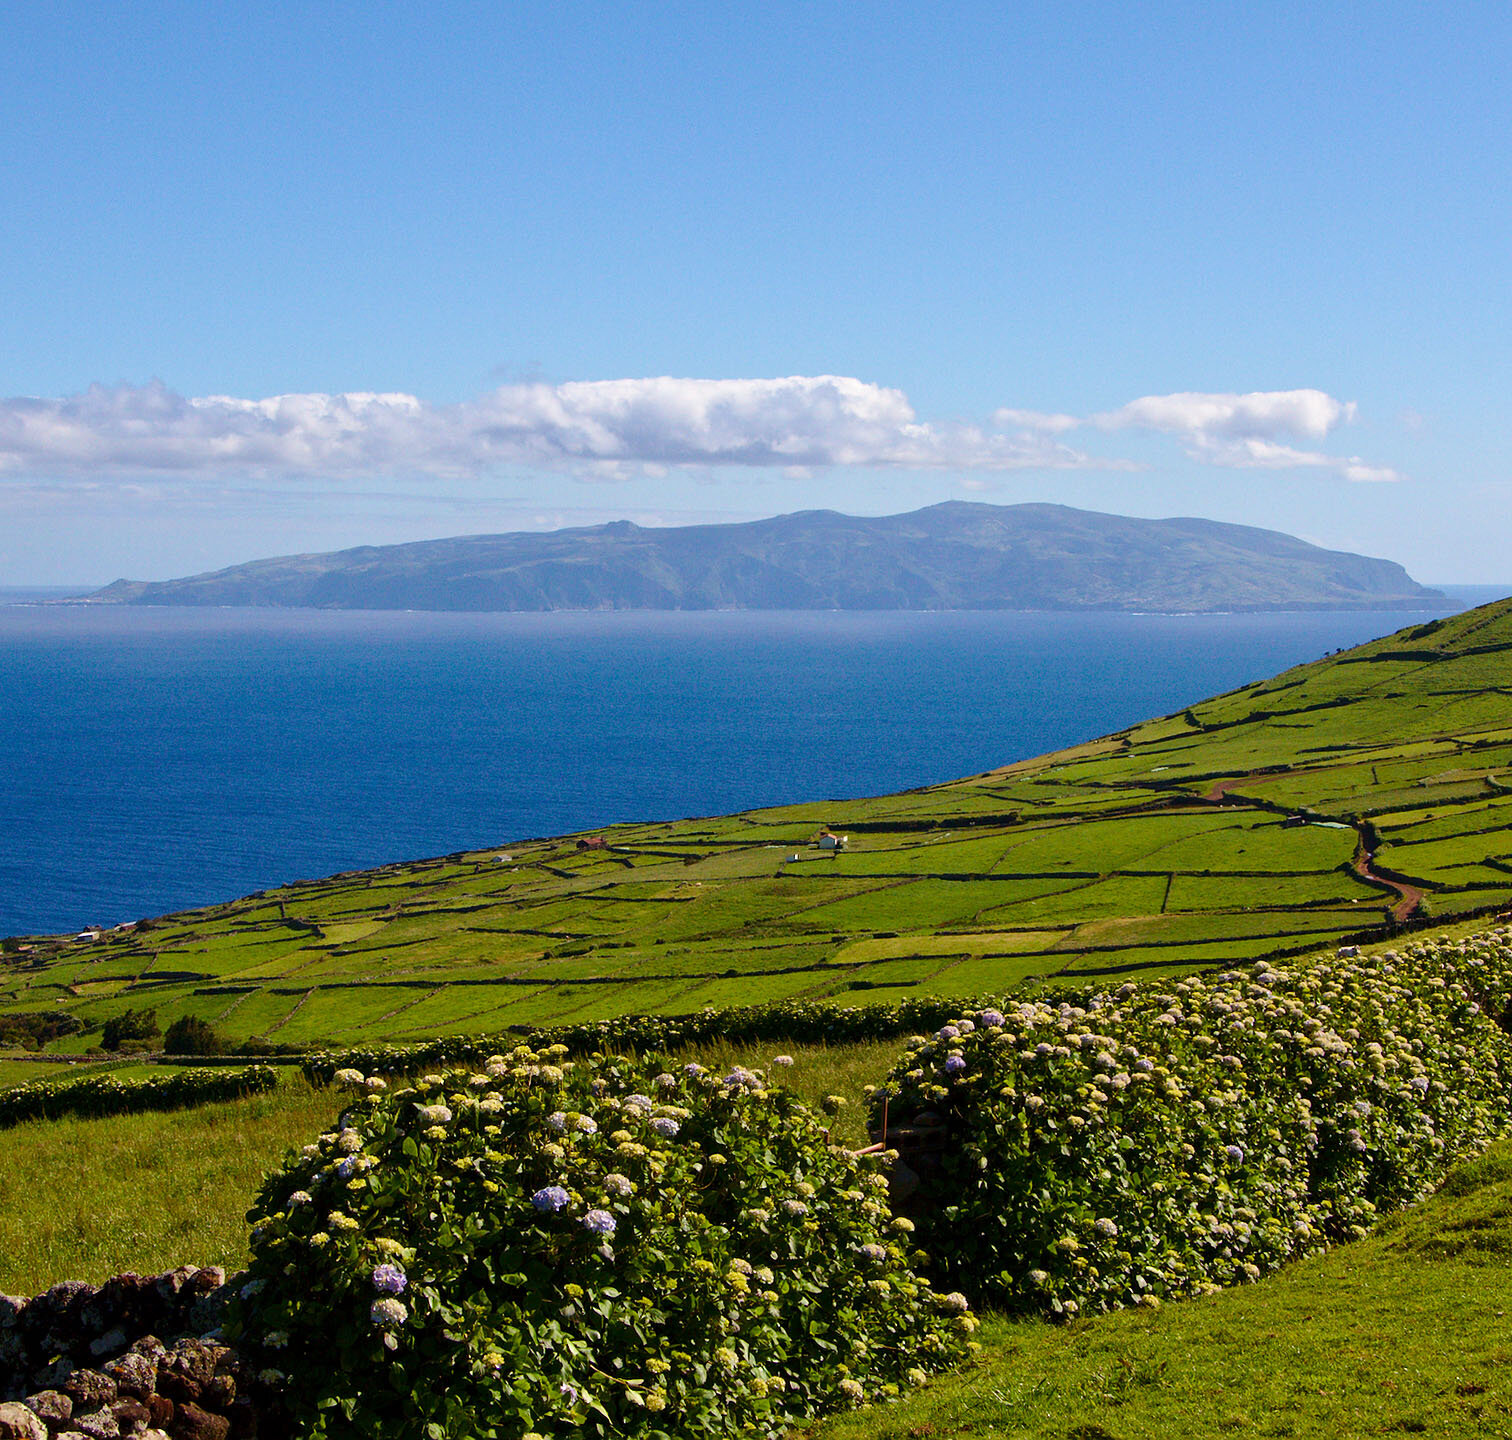 Landscape view of Pico (foreground) and Faial (background) Islands. Credit: Santiago Giralt.